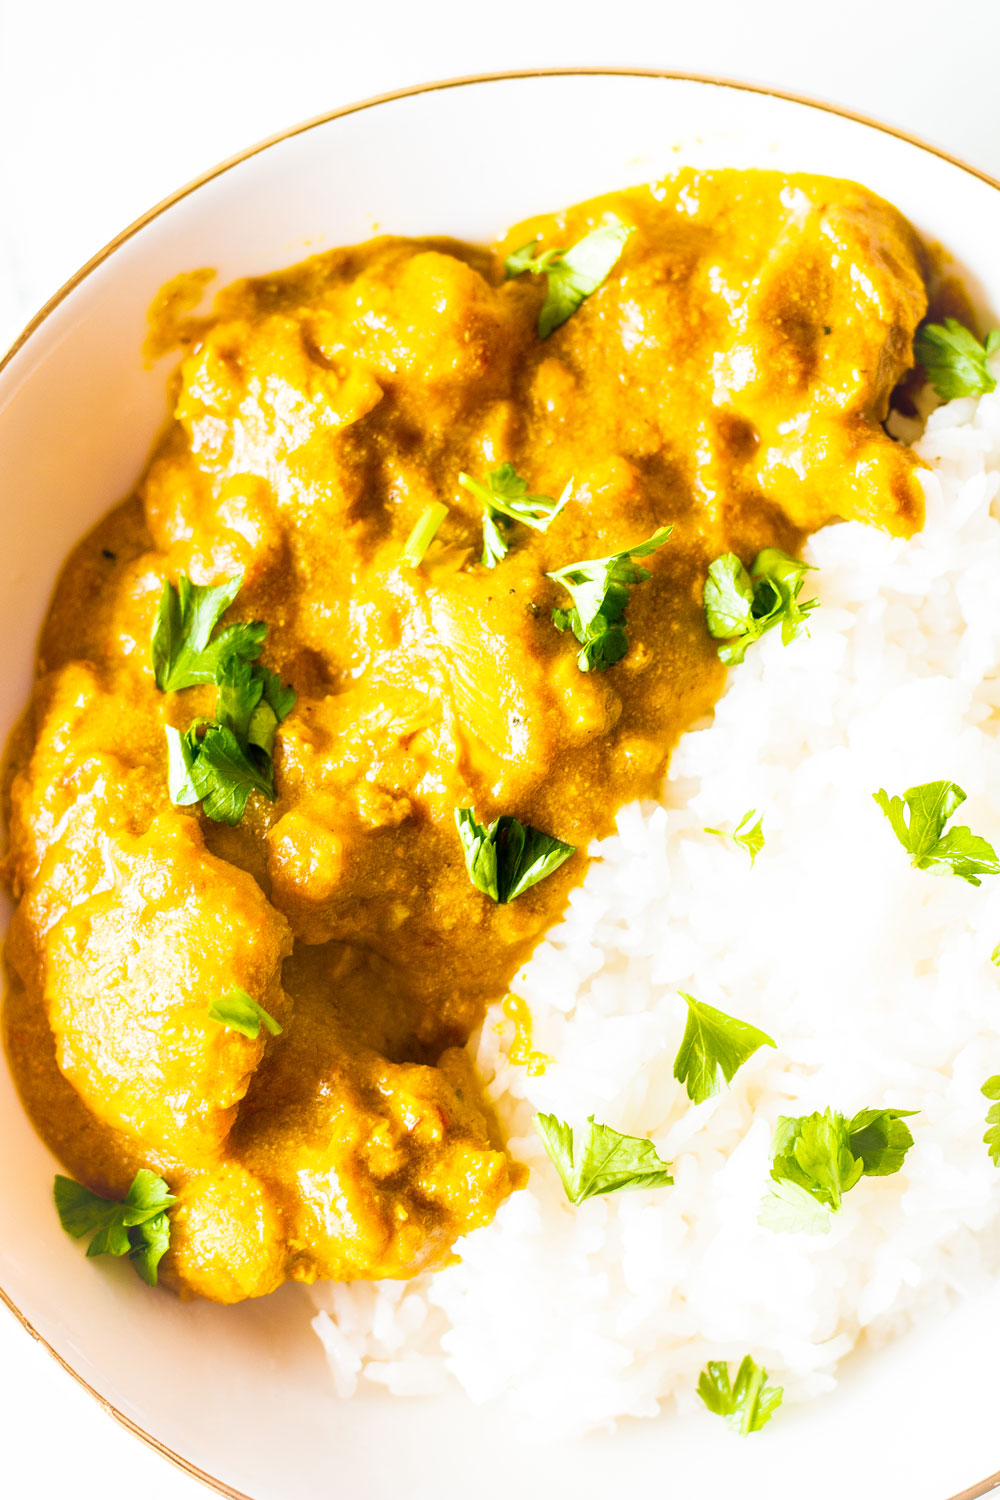 Can't resist a chicken curry but are trying to cut down calories? Then forget takeaways and start making your curries at home. This deliciously rich Chicken Tikka Masala with Homemade Curry is easy to make, and it's tastier than takeout, too! https://www.spotebi.com/recipes/chicken-tikka-masala-homemade-curry-paste/